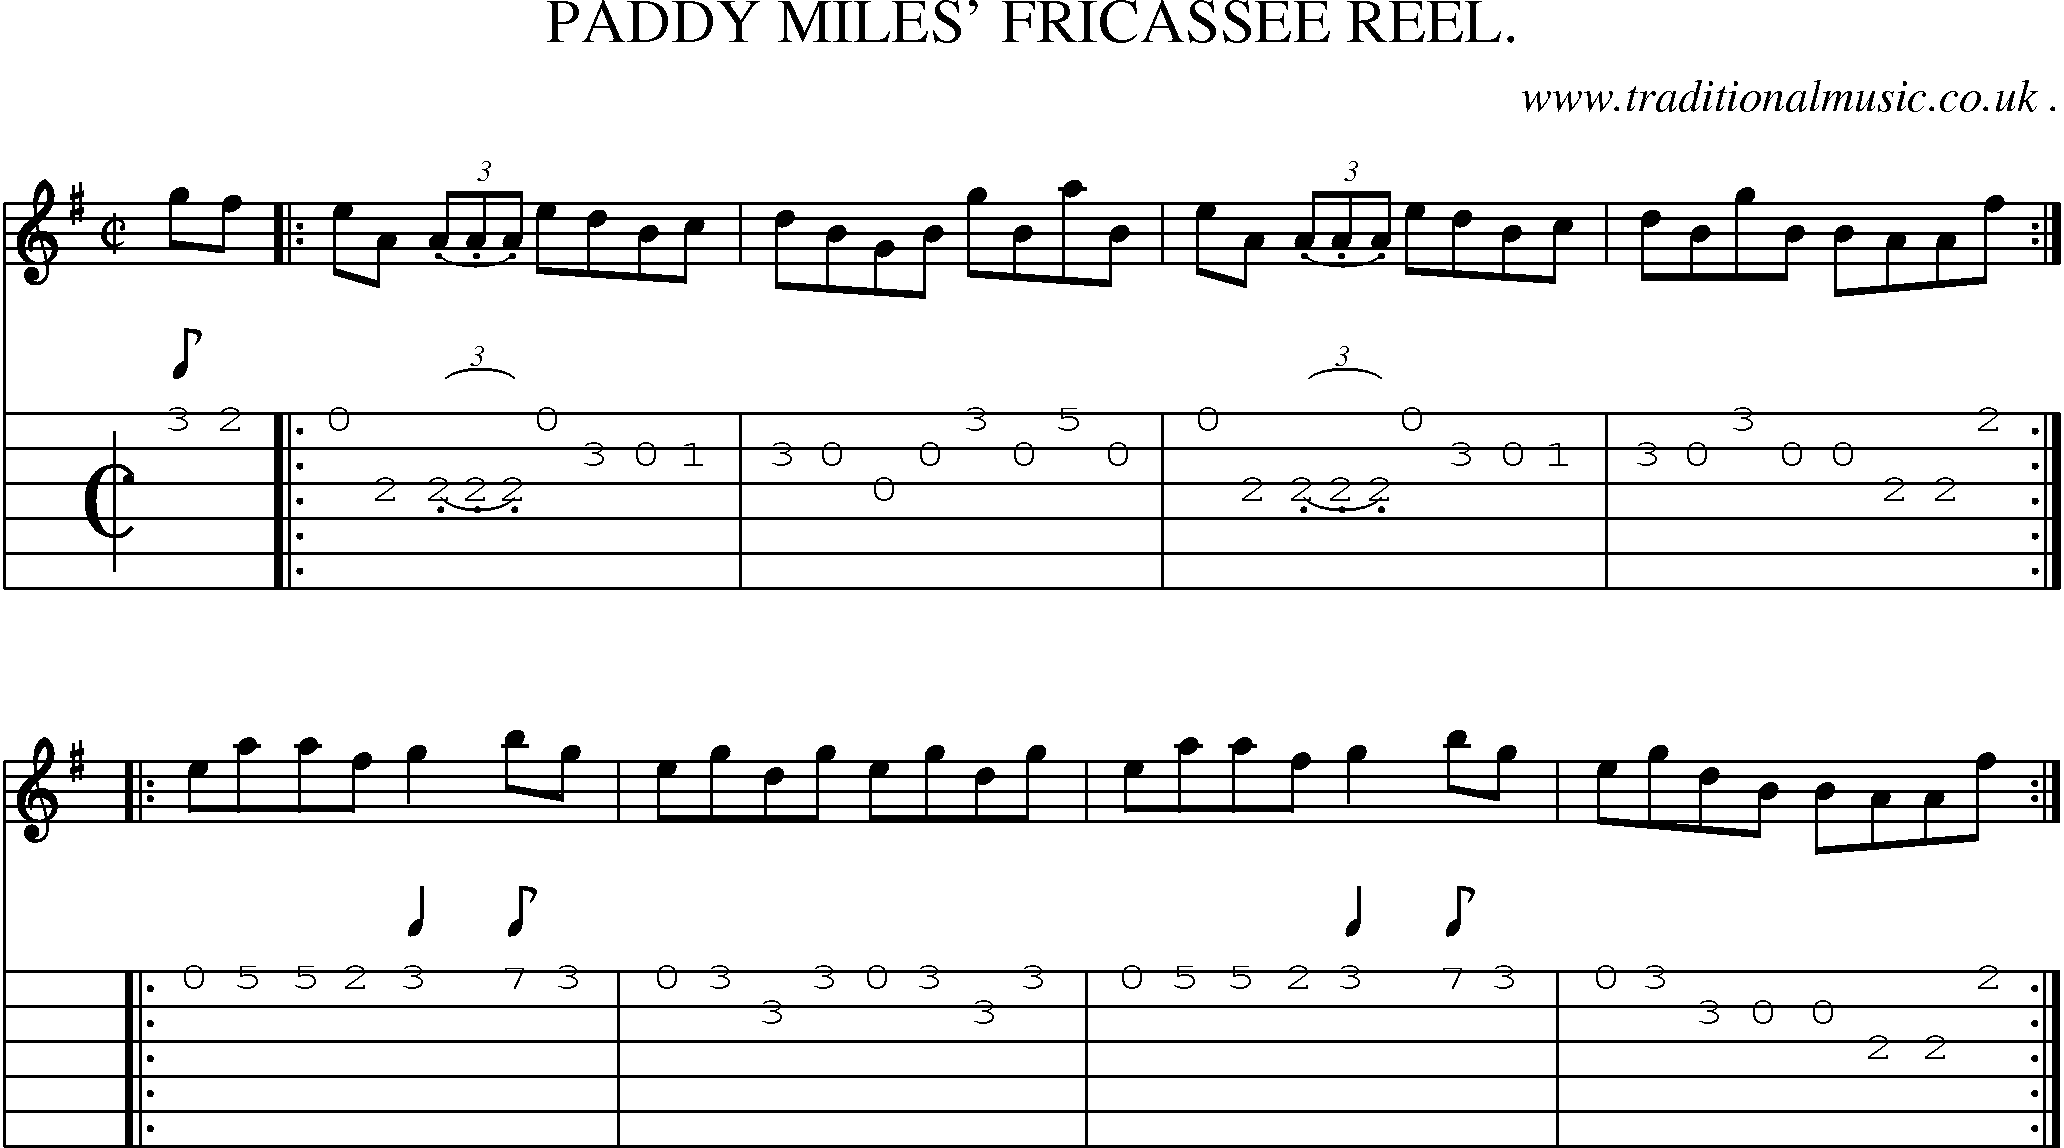 Sheet-Music and Guitar Tabs for Paddy Miles Fricassee Reel